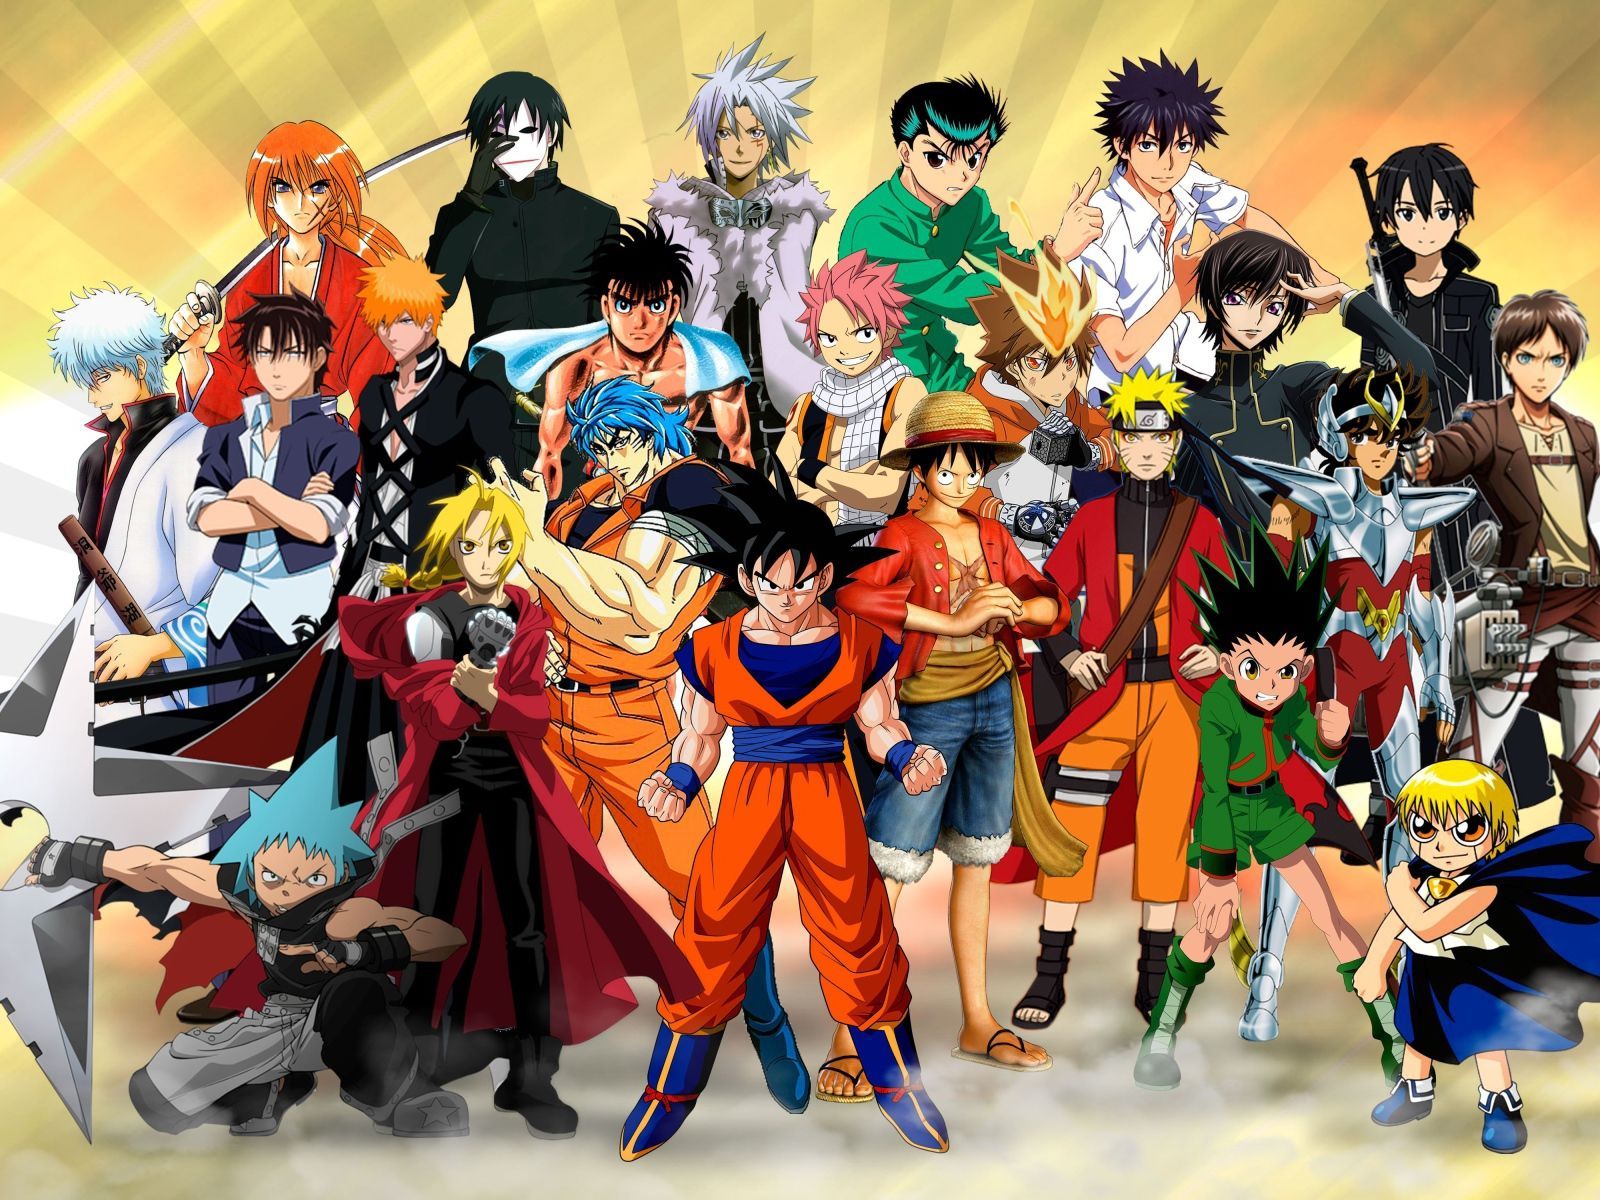 All Anime Together Wallpapers - Wallpaper Cave